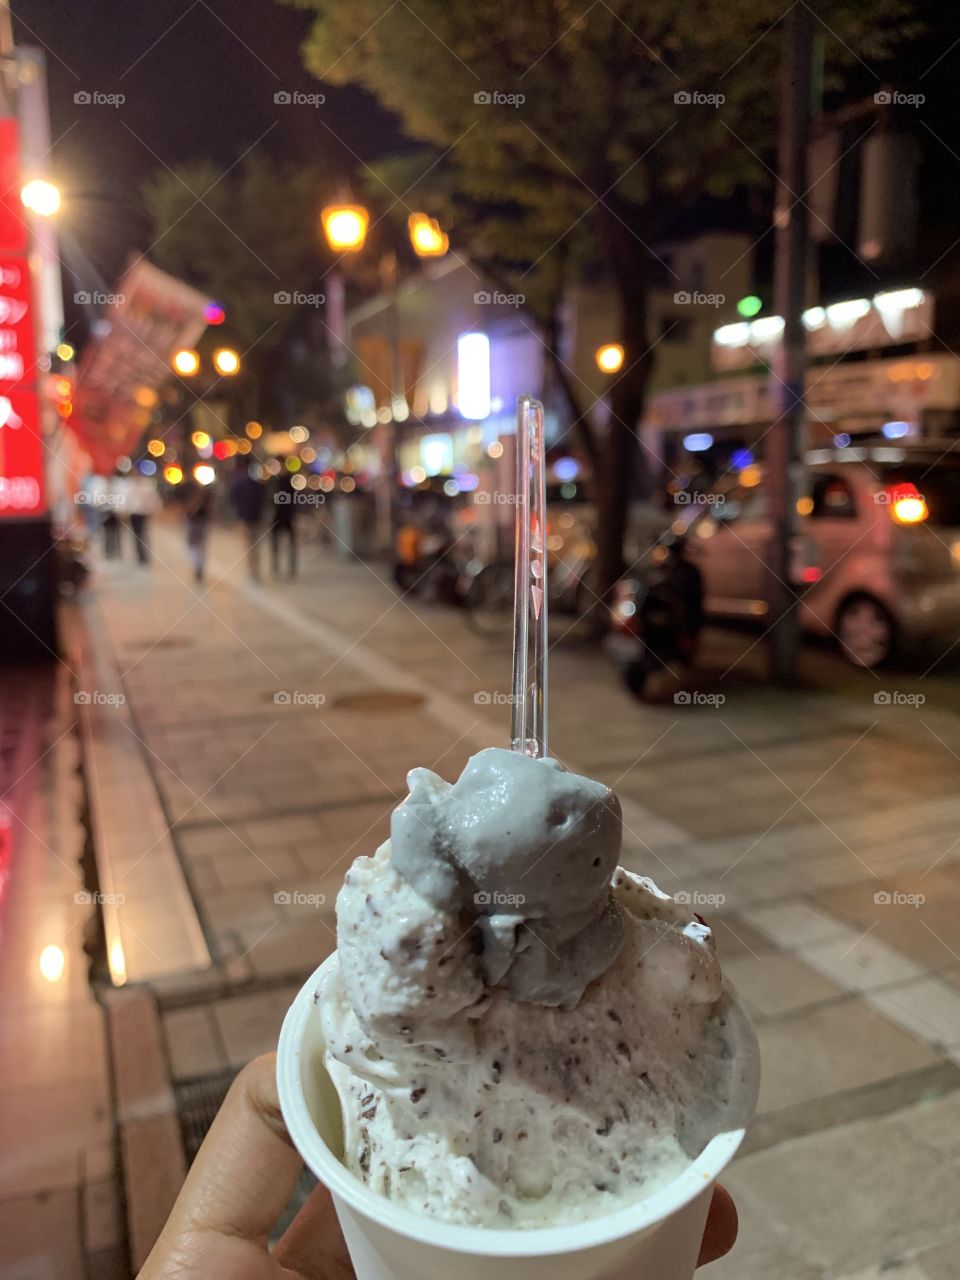 Picture of an icecream in a street